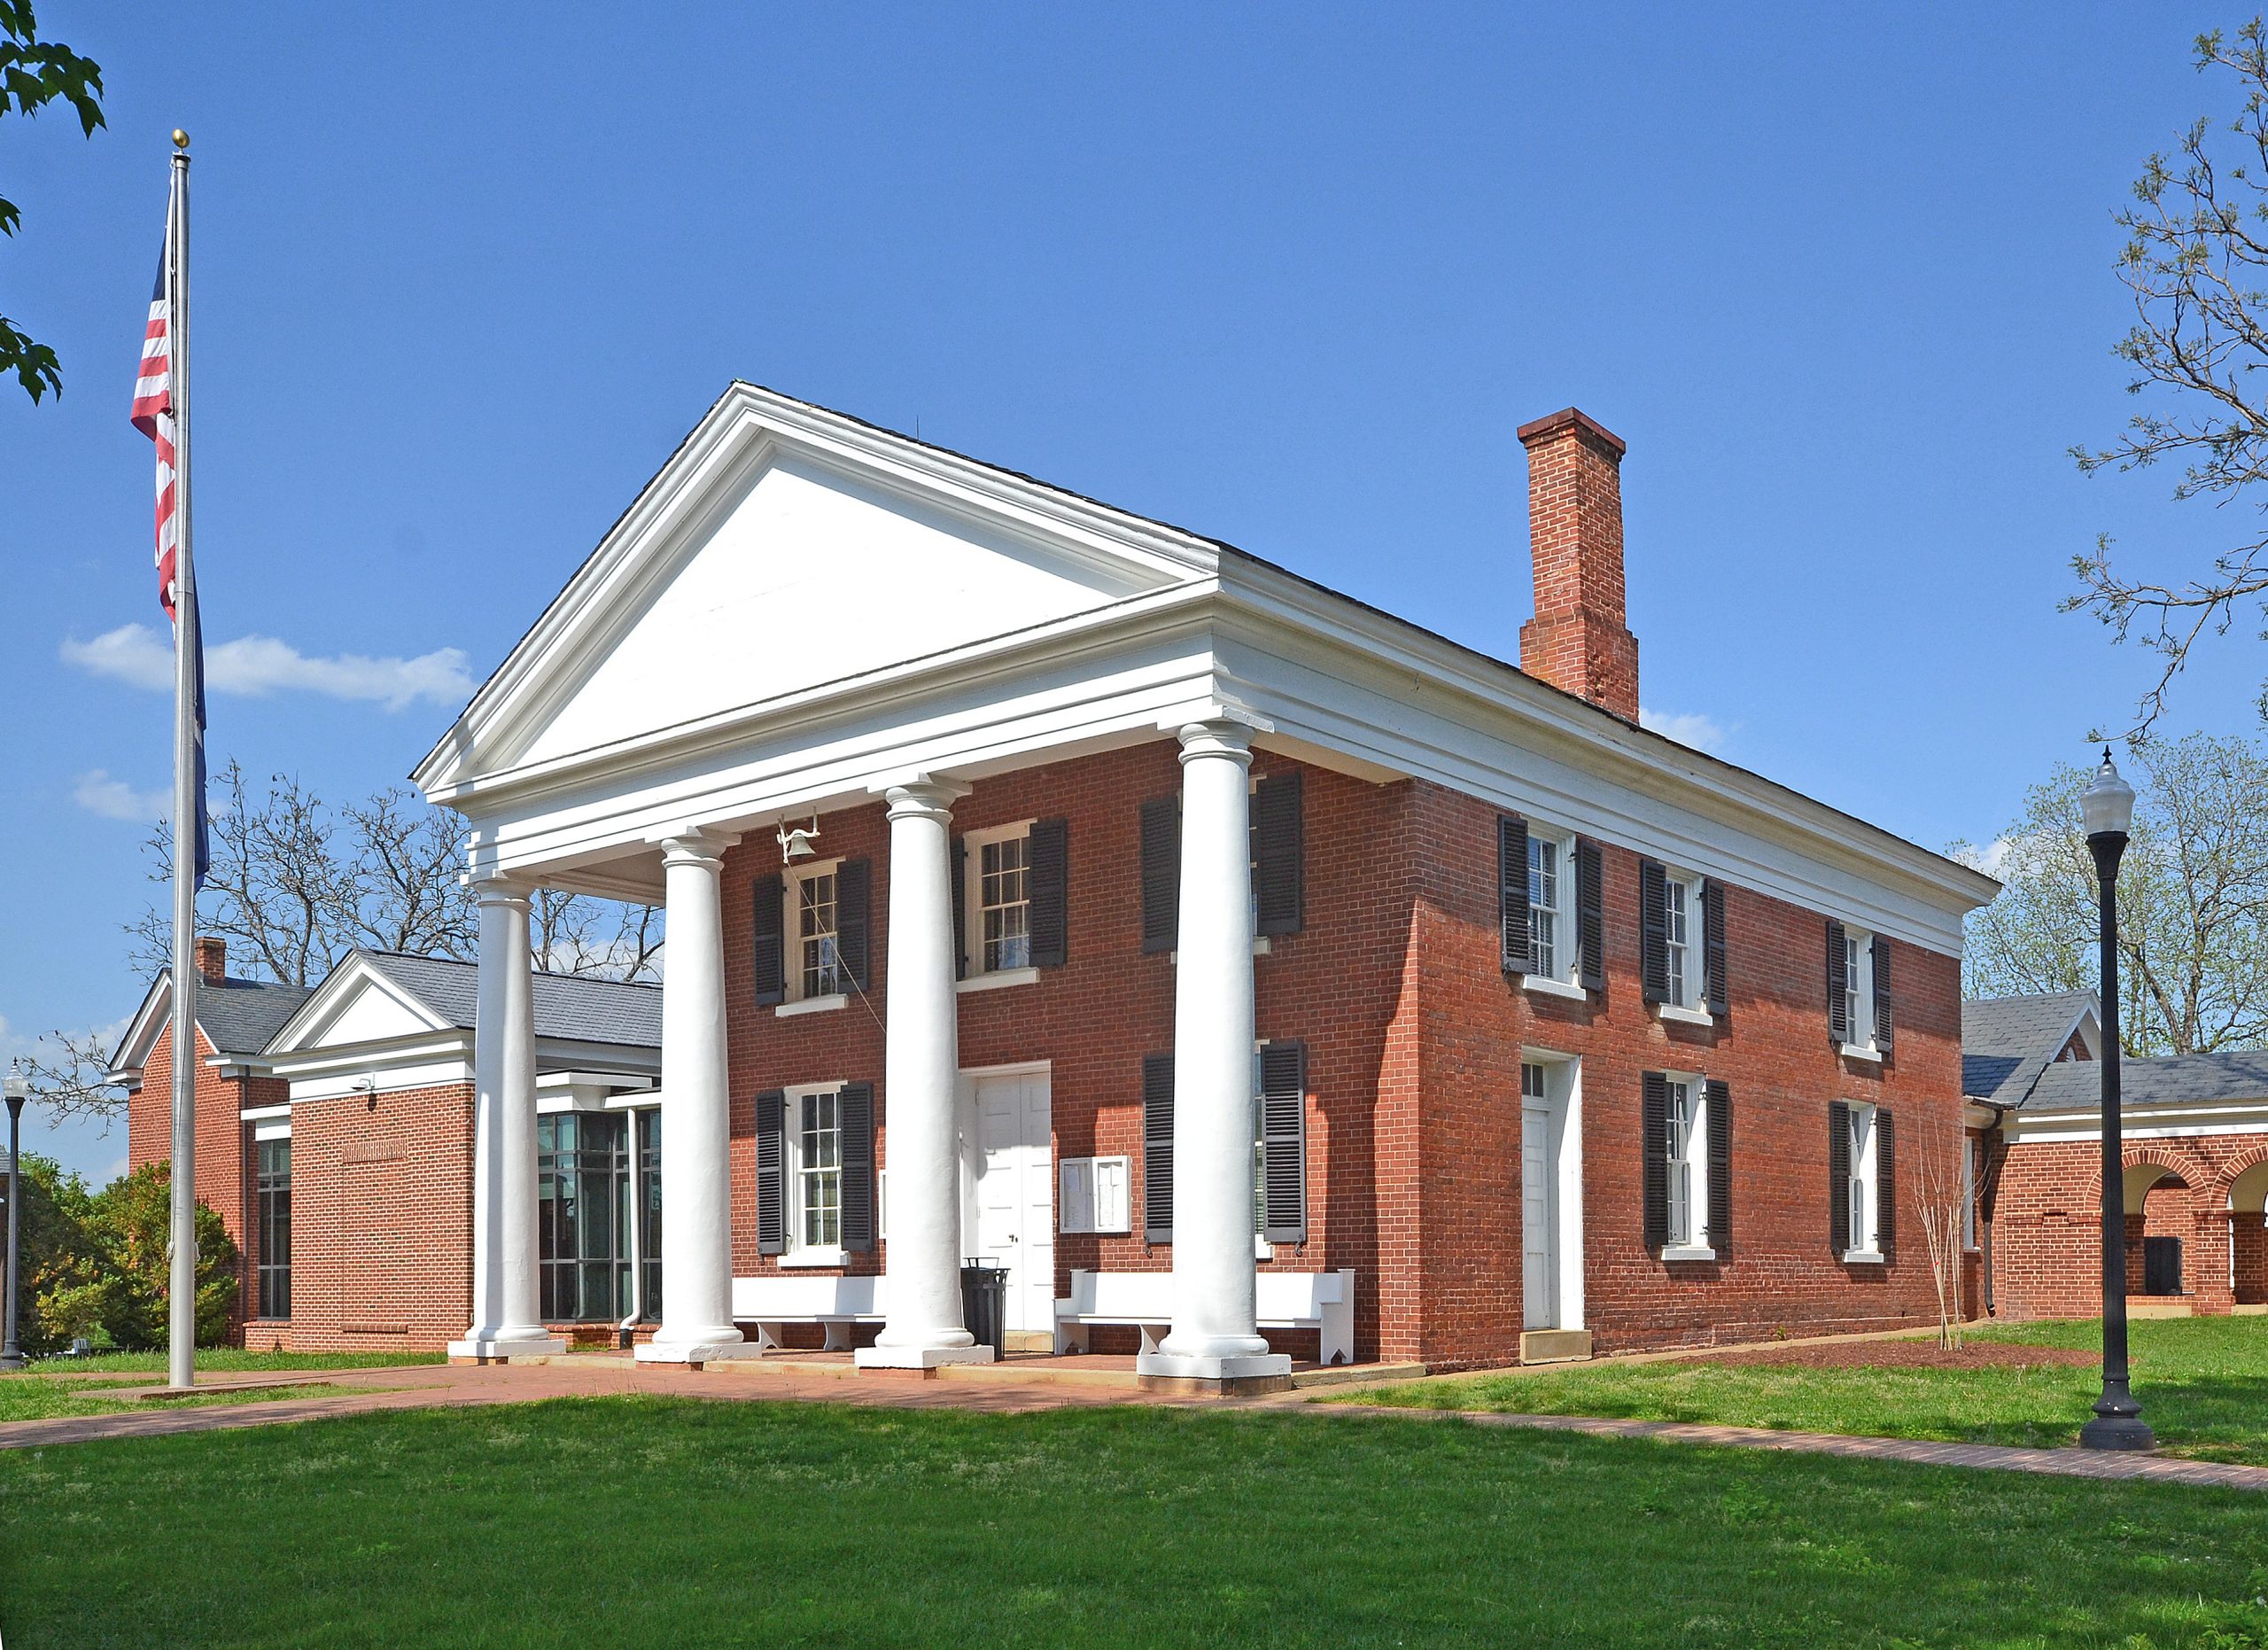 037-0136_Goochland_CH_HD_2022_Courthouse_exterior_front_oblique_VLR_Online-scaled